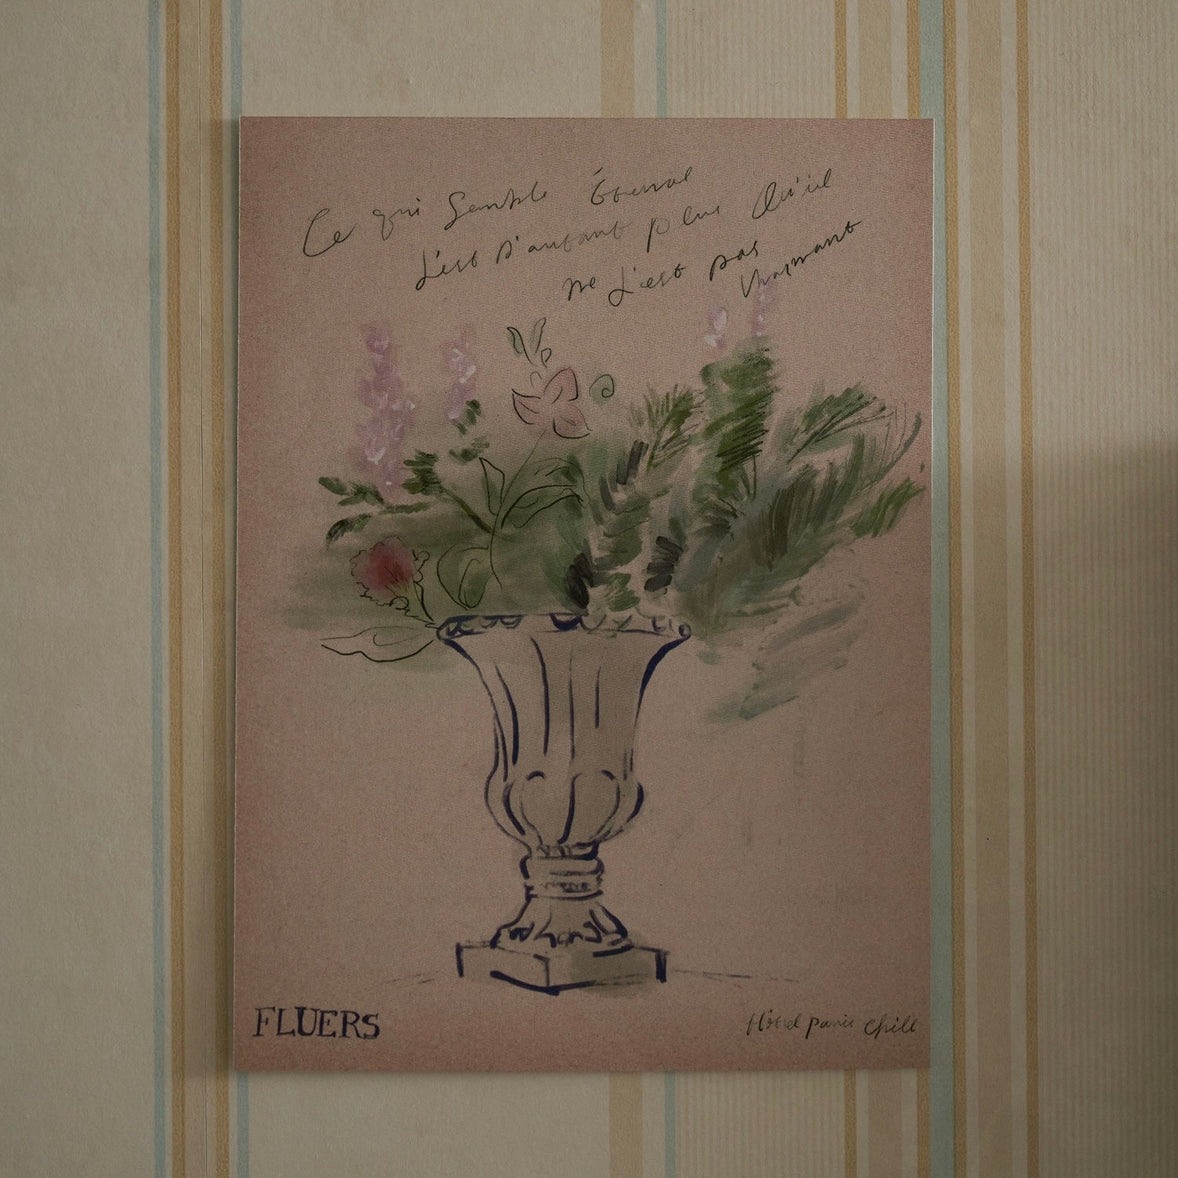 BR-3085-HOTEL PARIS CHILL-HOTEL PARIS CHILL ポストカード｜The Old Pot with Flowers Postcard